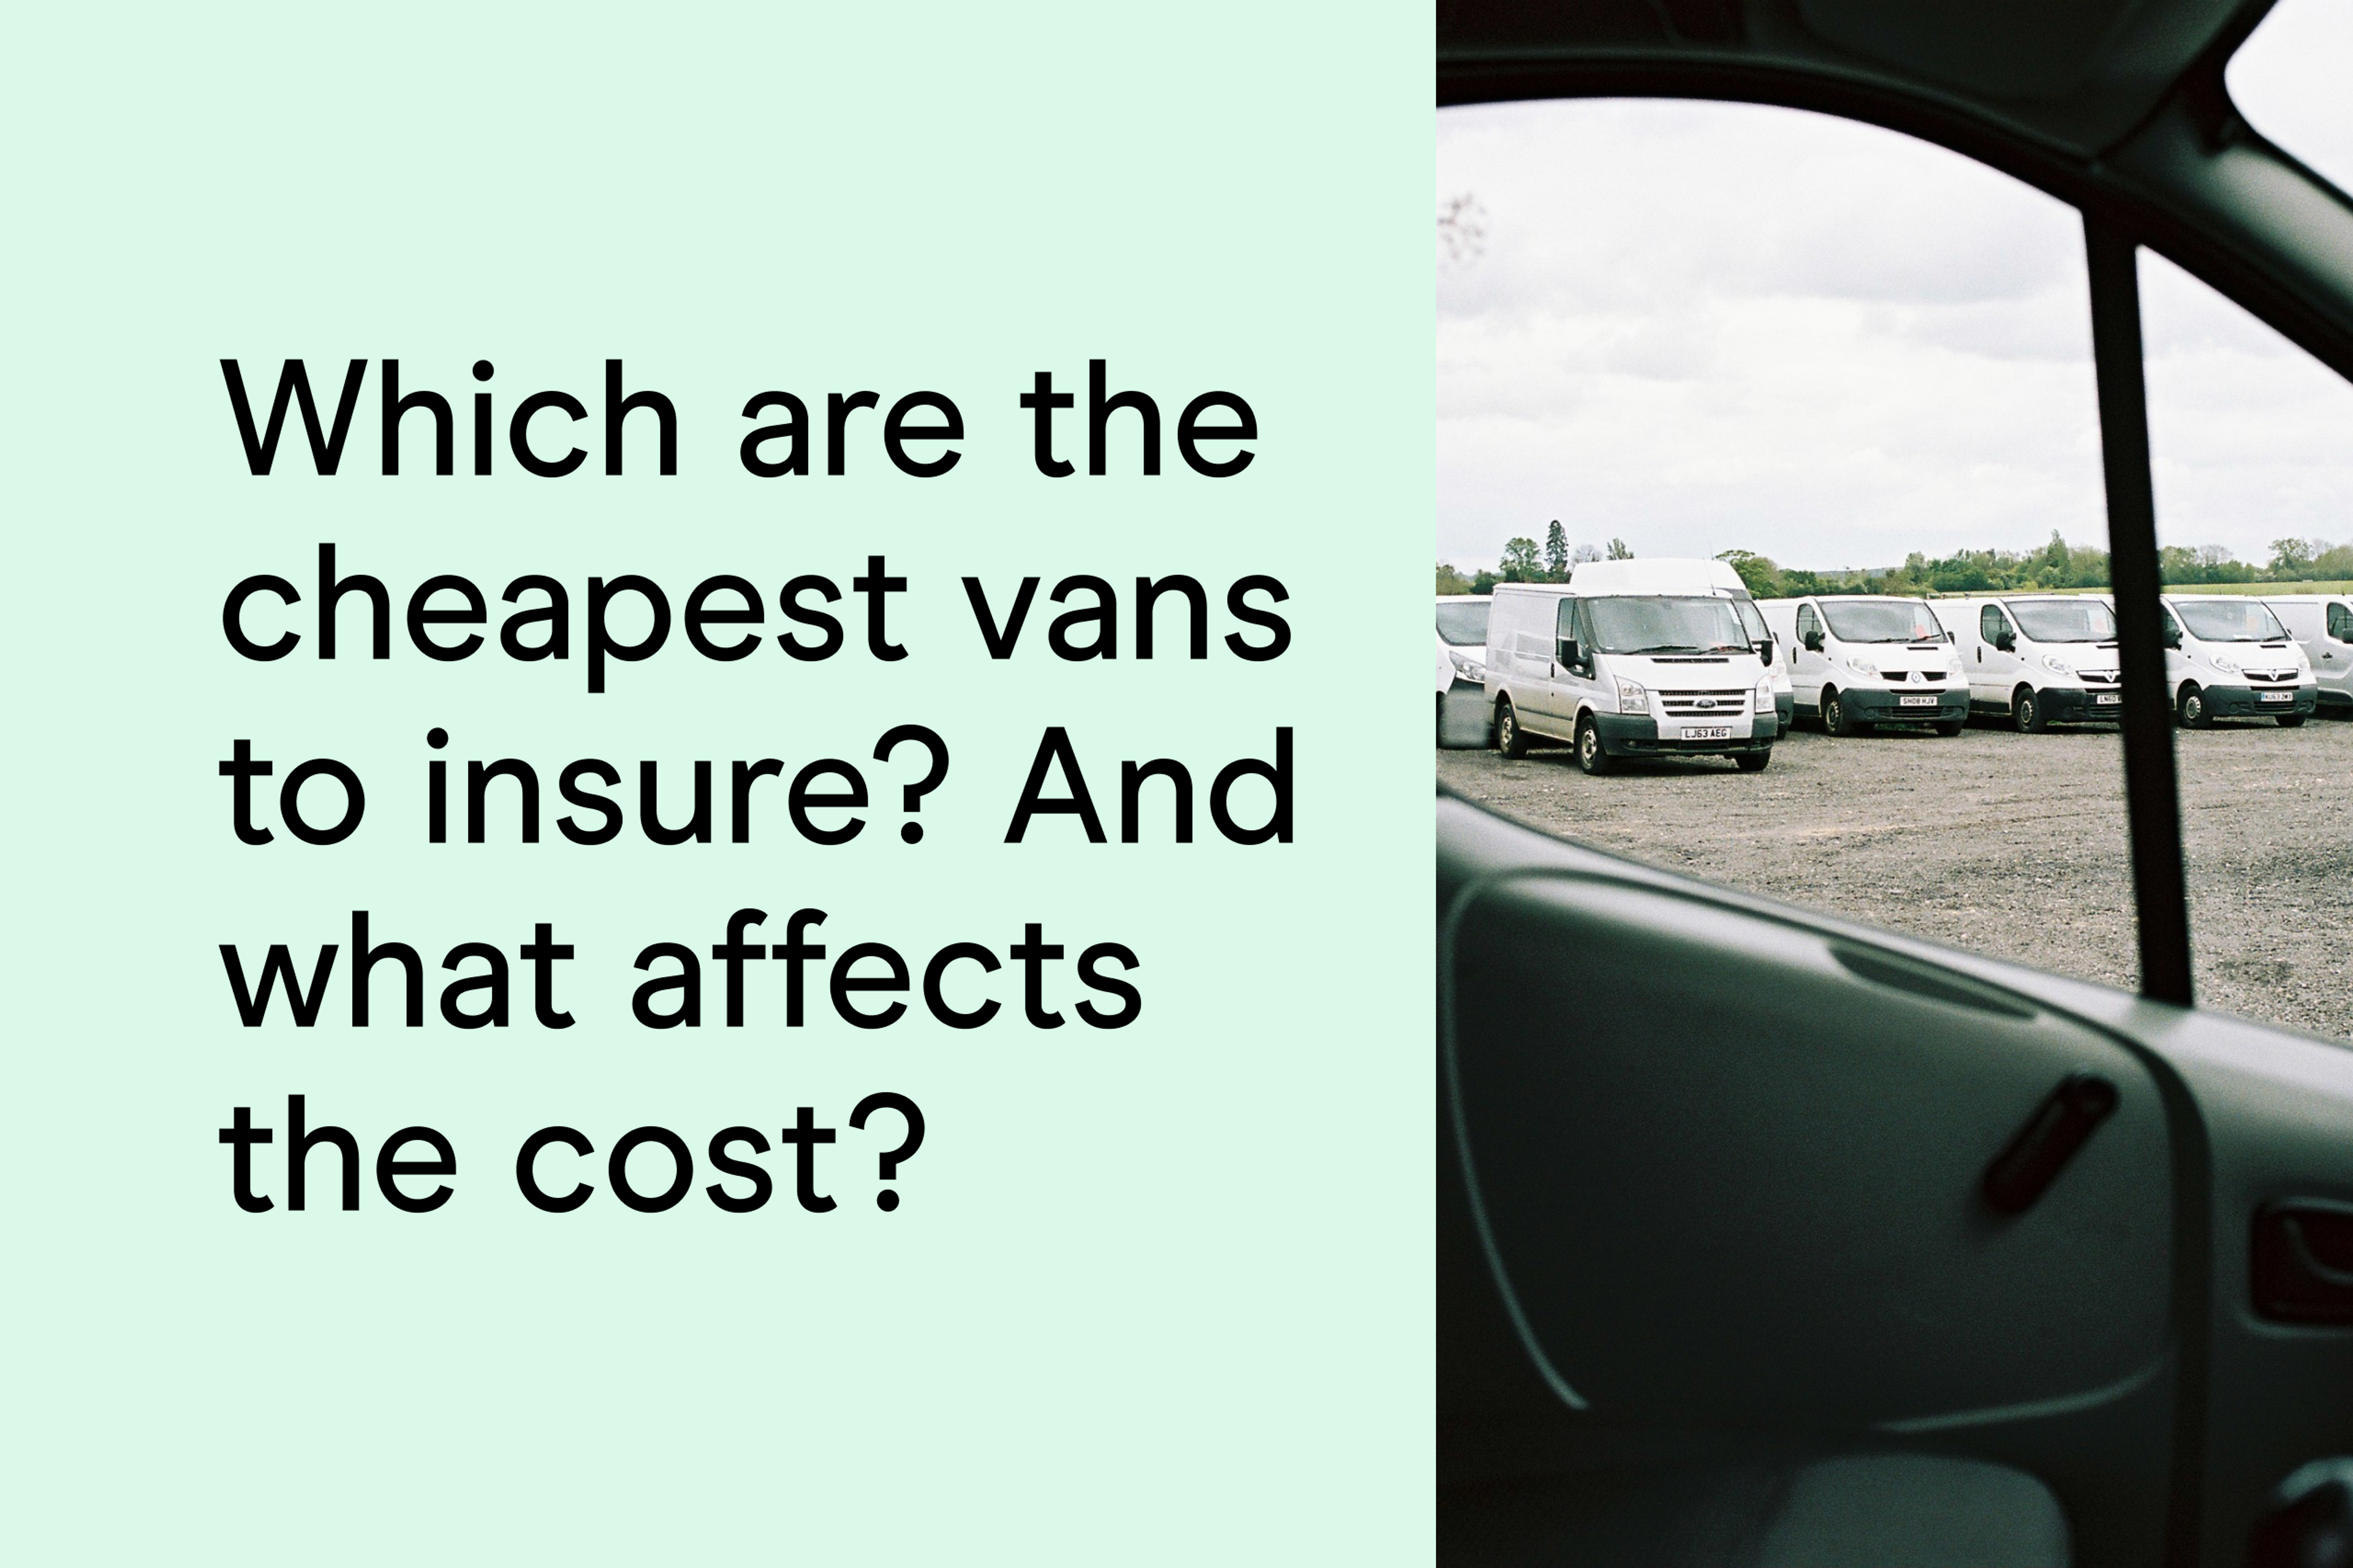 Cheapest vans to insure